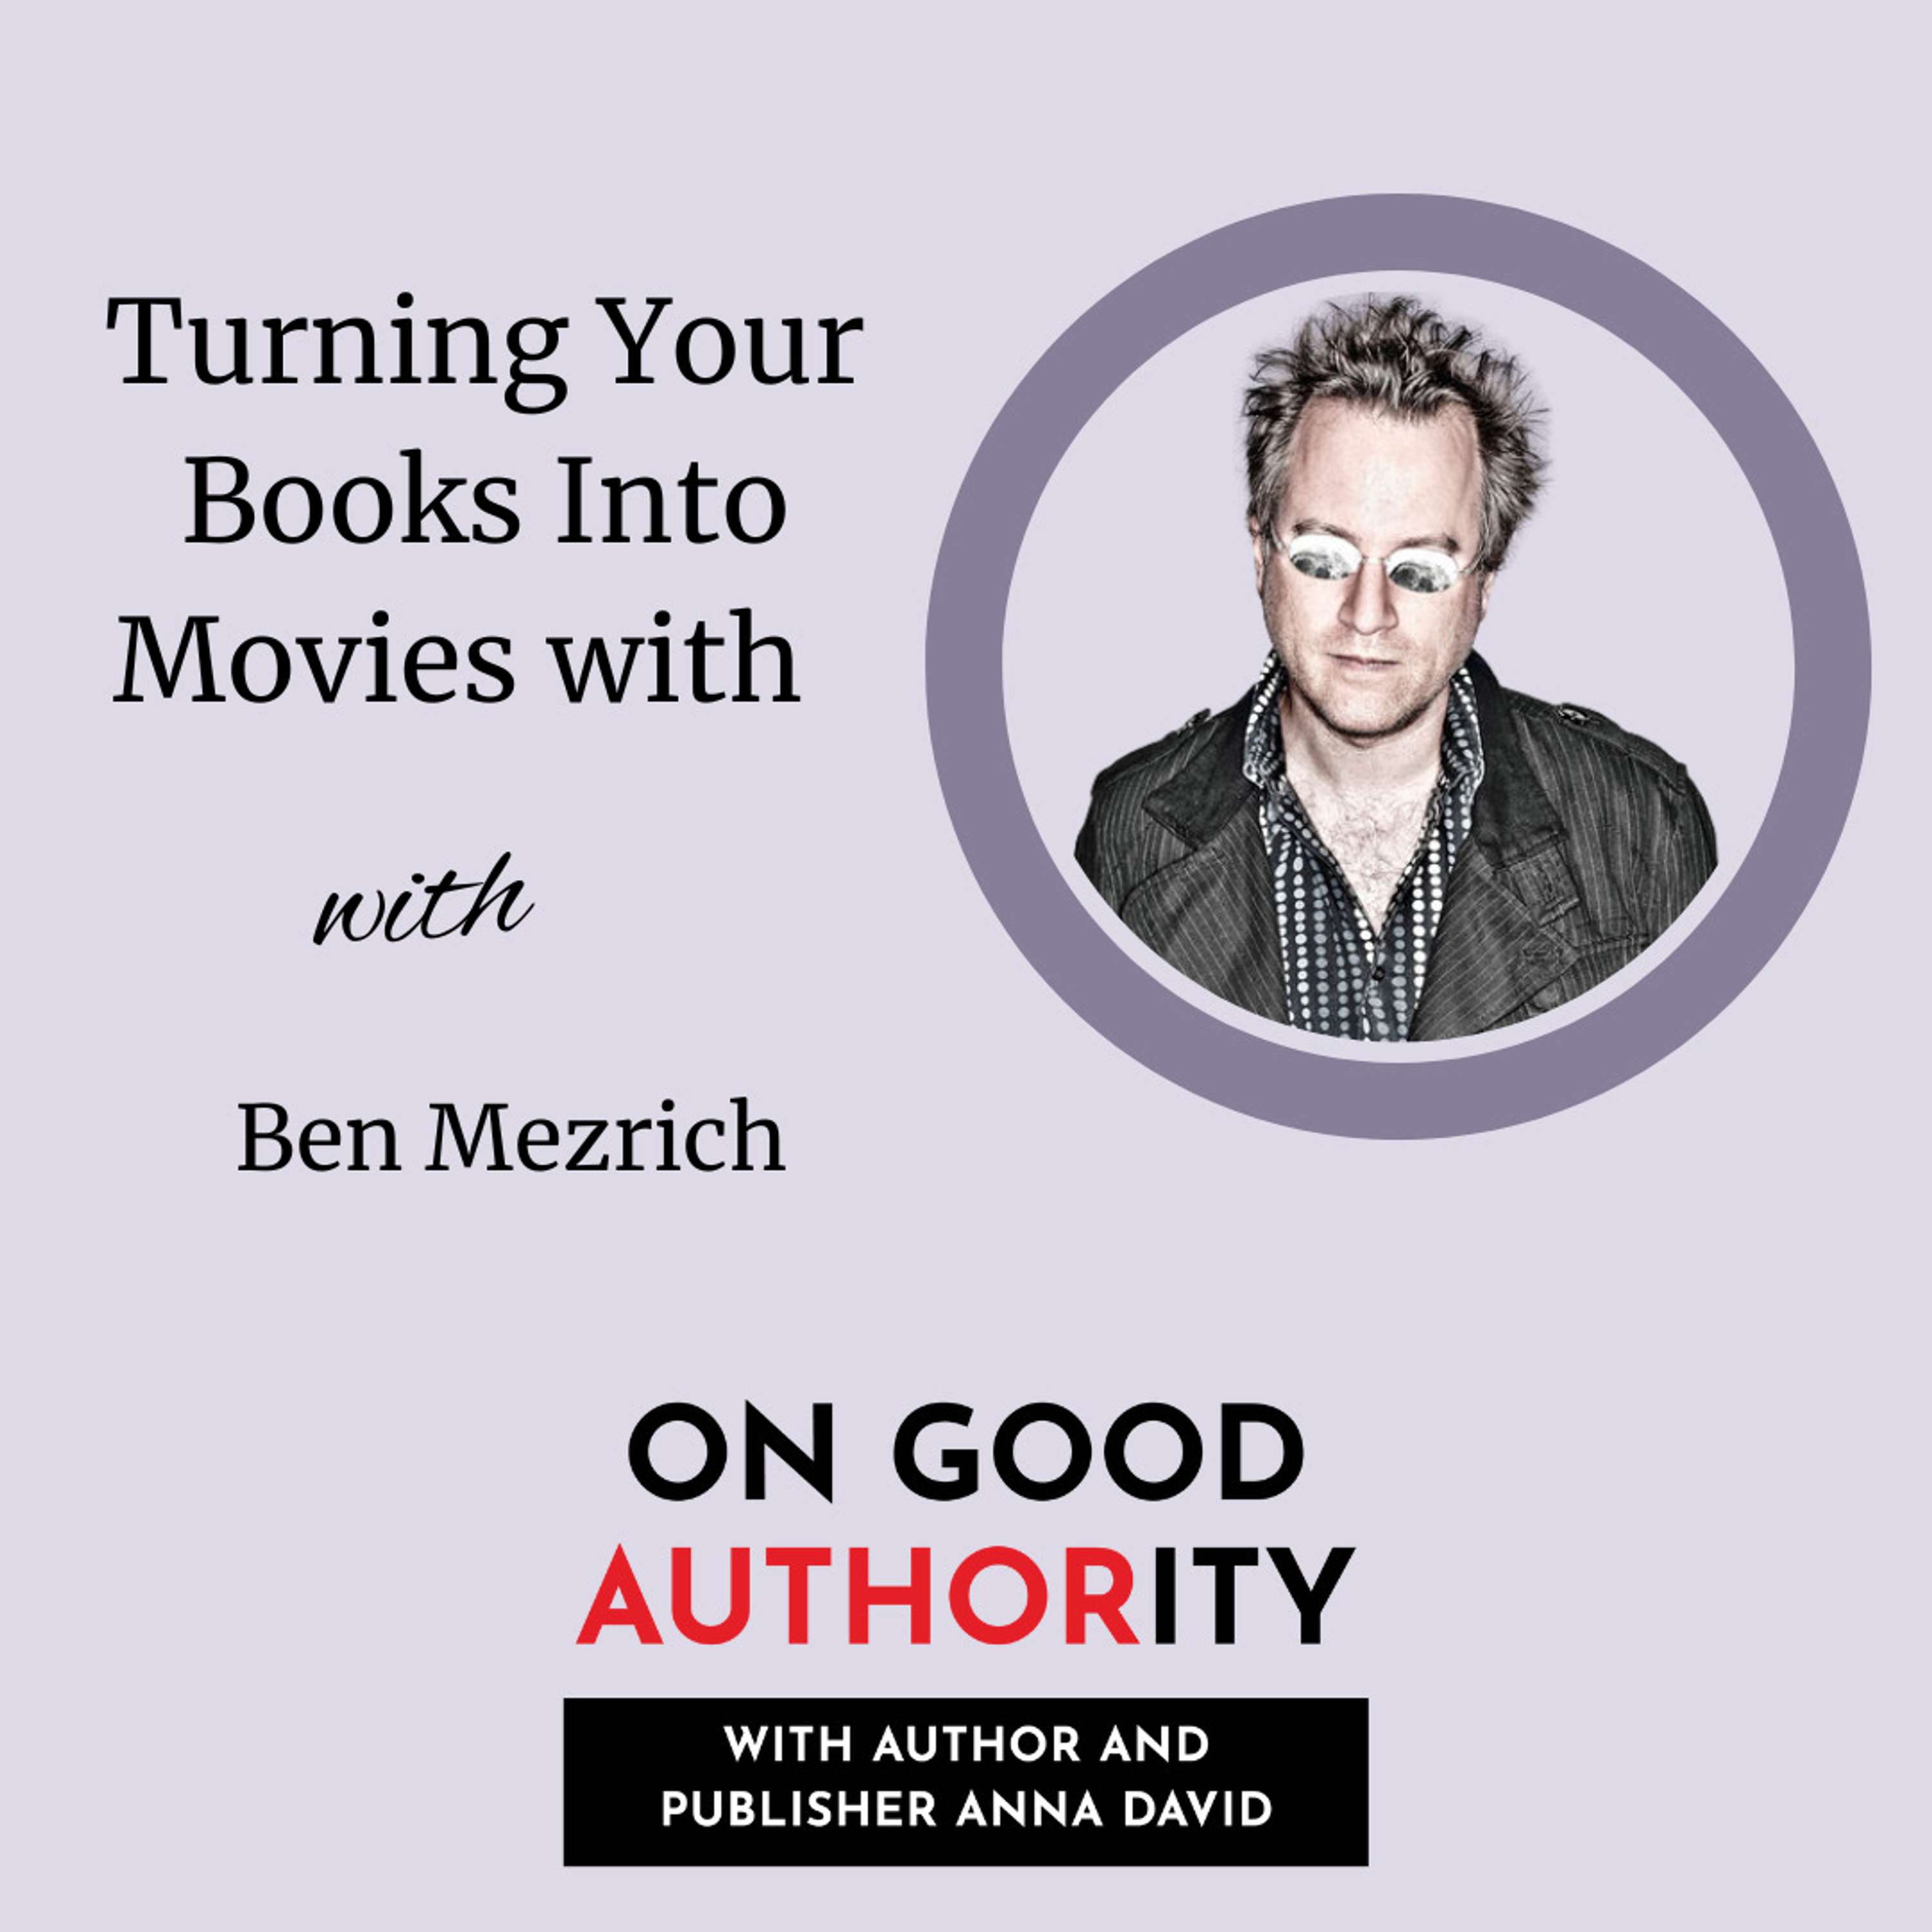 Turning Your Books Into Movies with Ben Mezrich